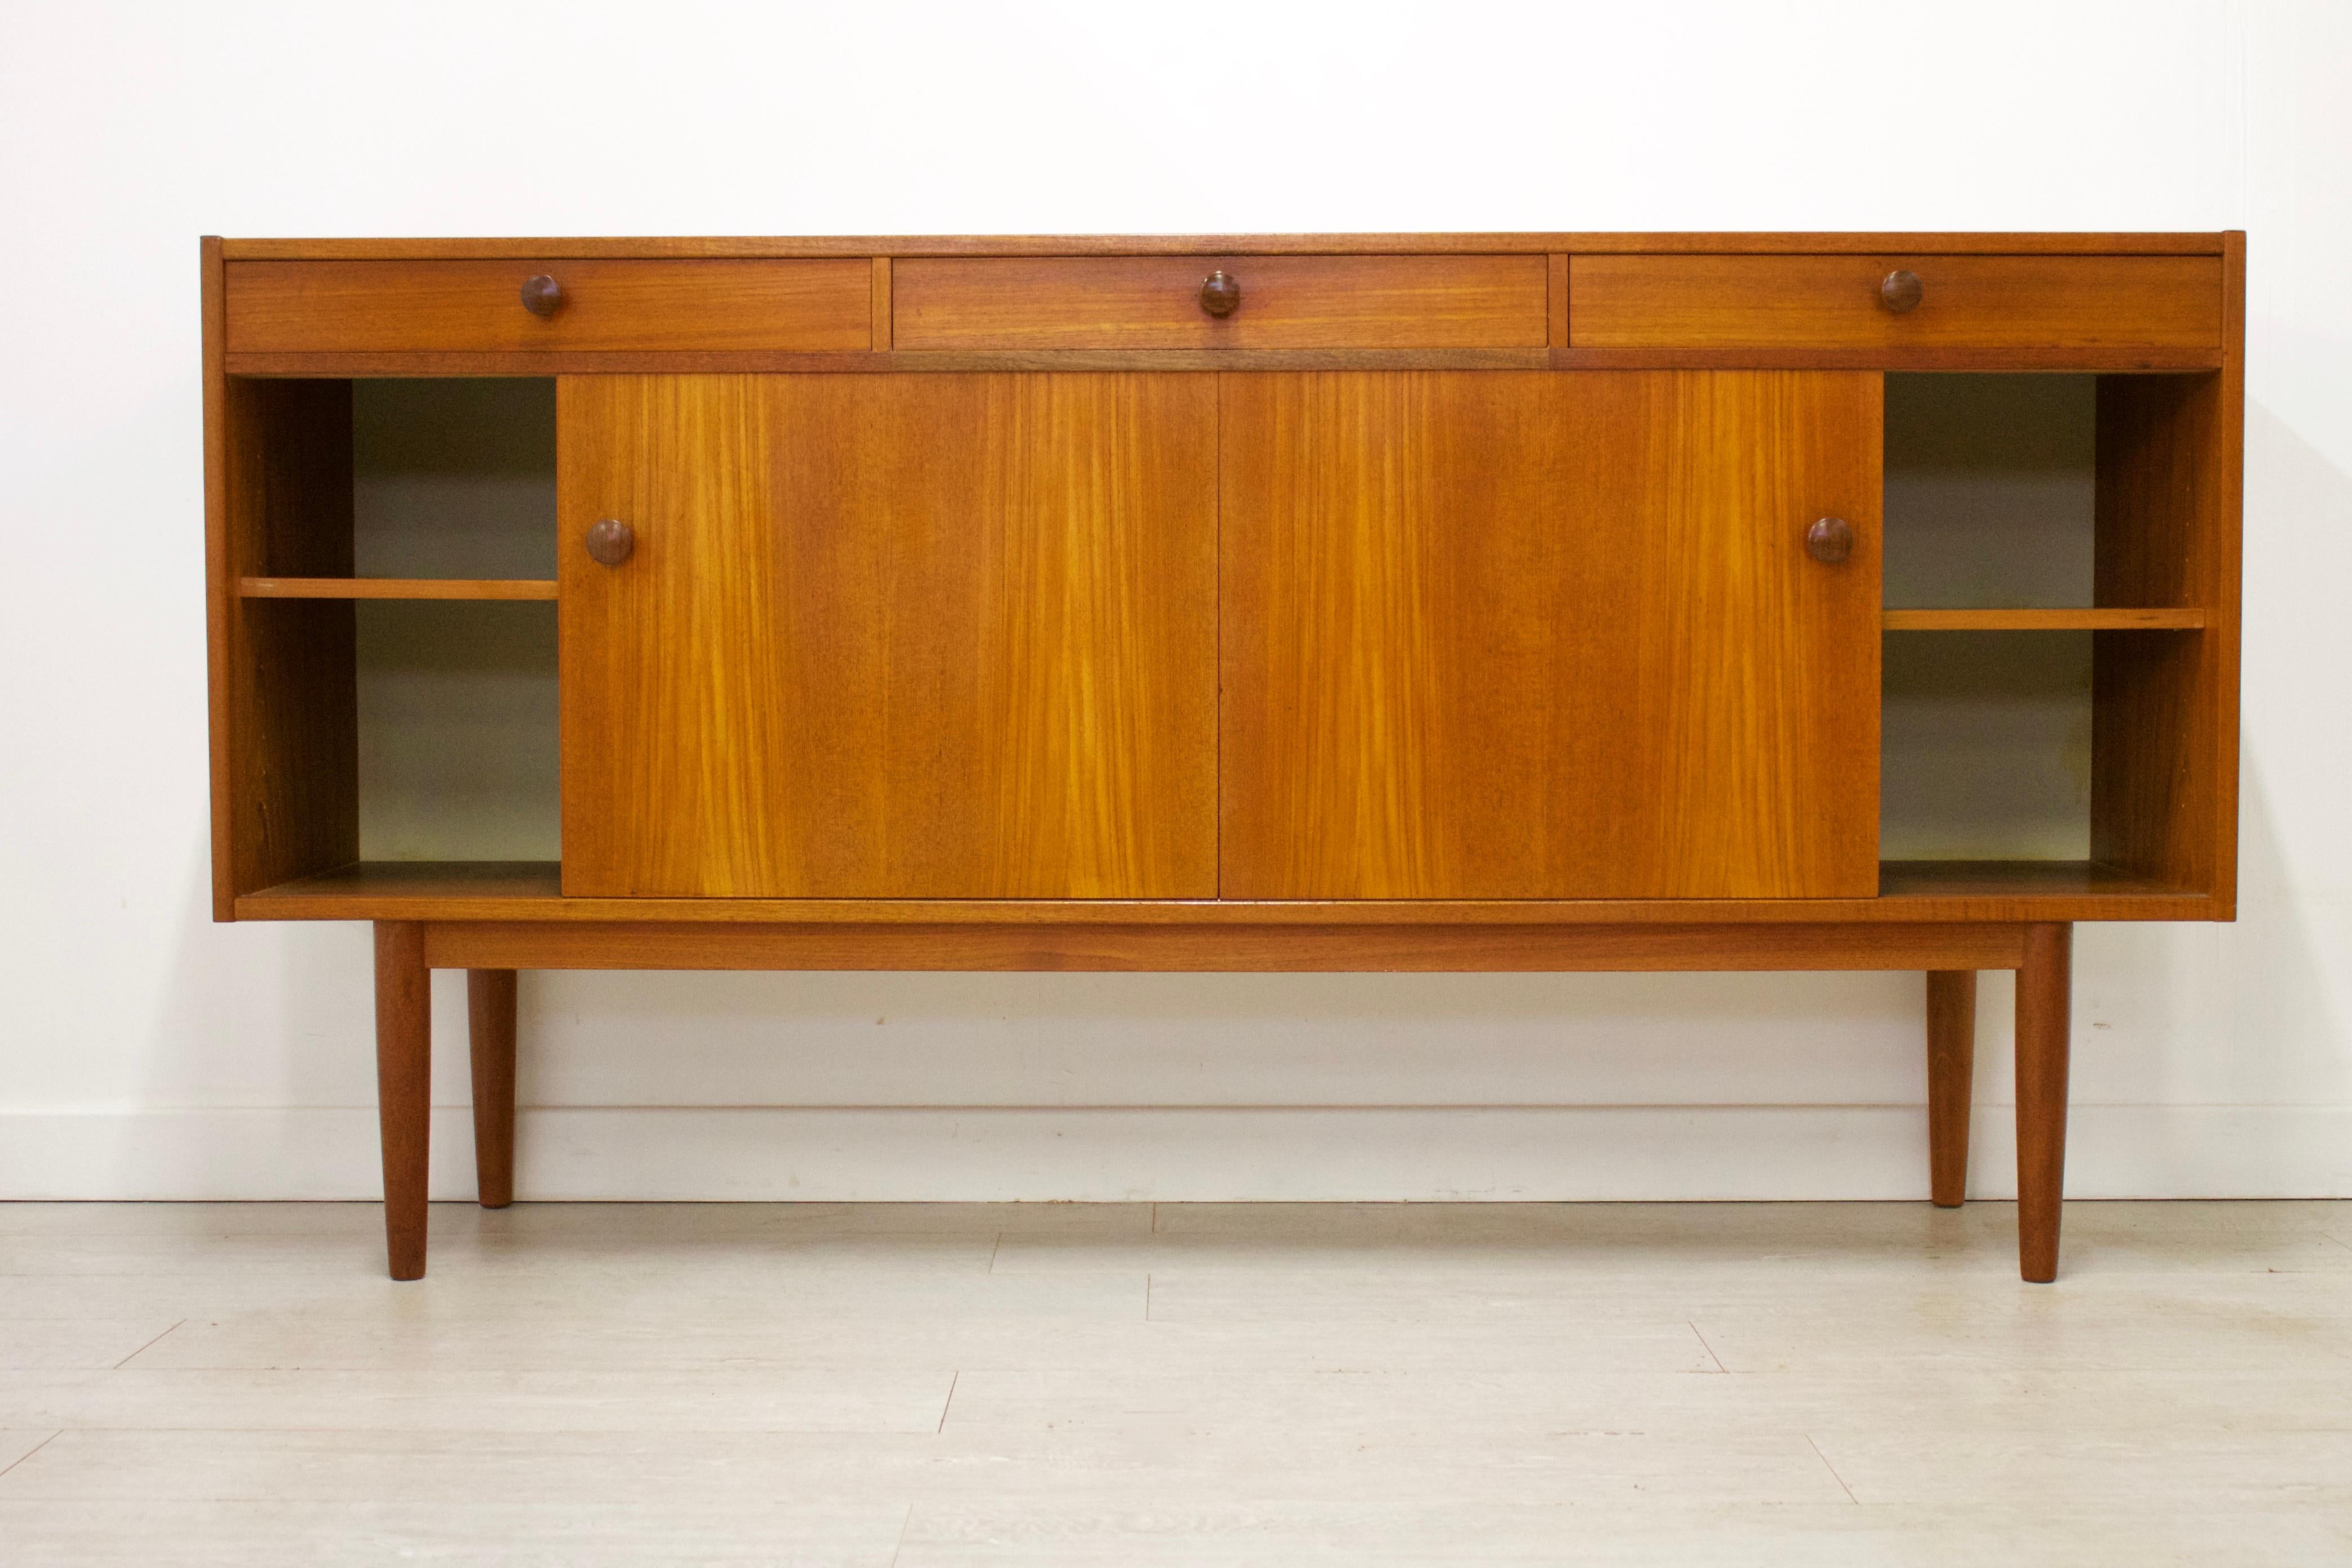 British Midcentury Teak Sideboard by Nils Jonsson for Troeds, 1960s For Sale